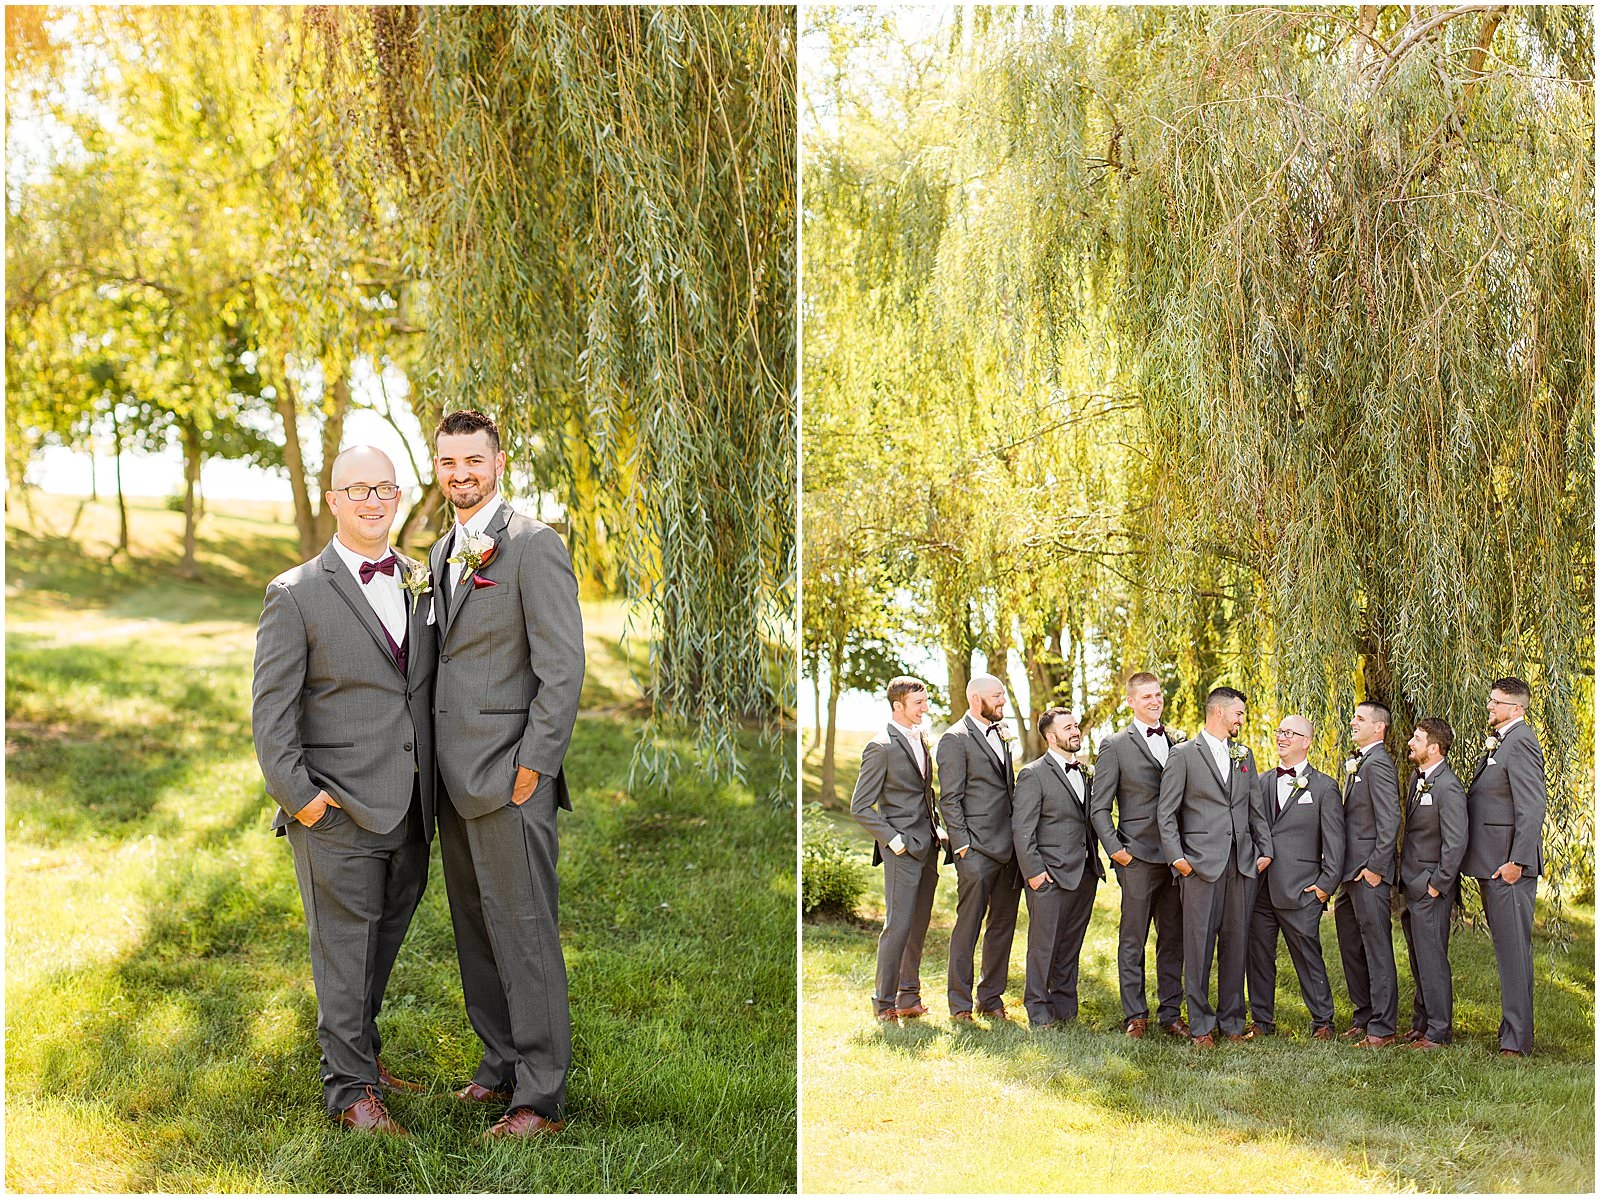 A Stunning Fall Wedding in Indianapolis, IN |. Sally and Andrew | Bret and Brandie Photography 0072.jpg